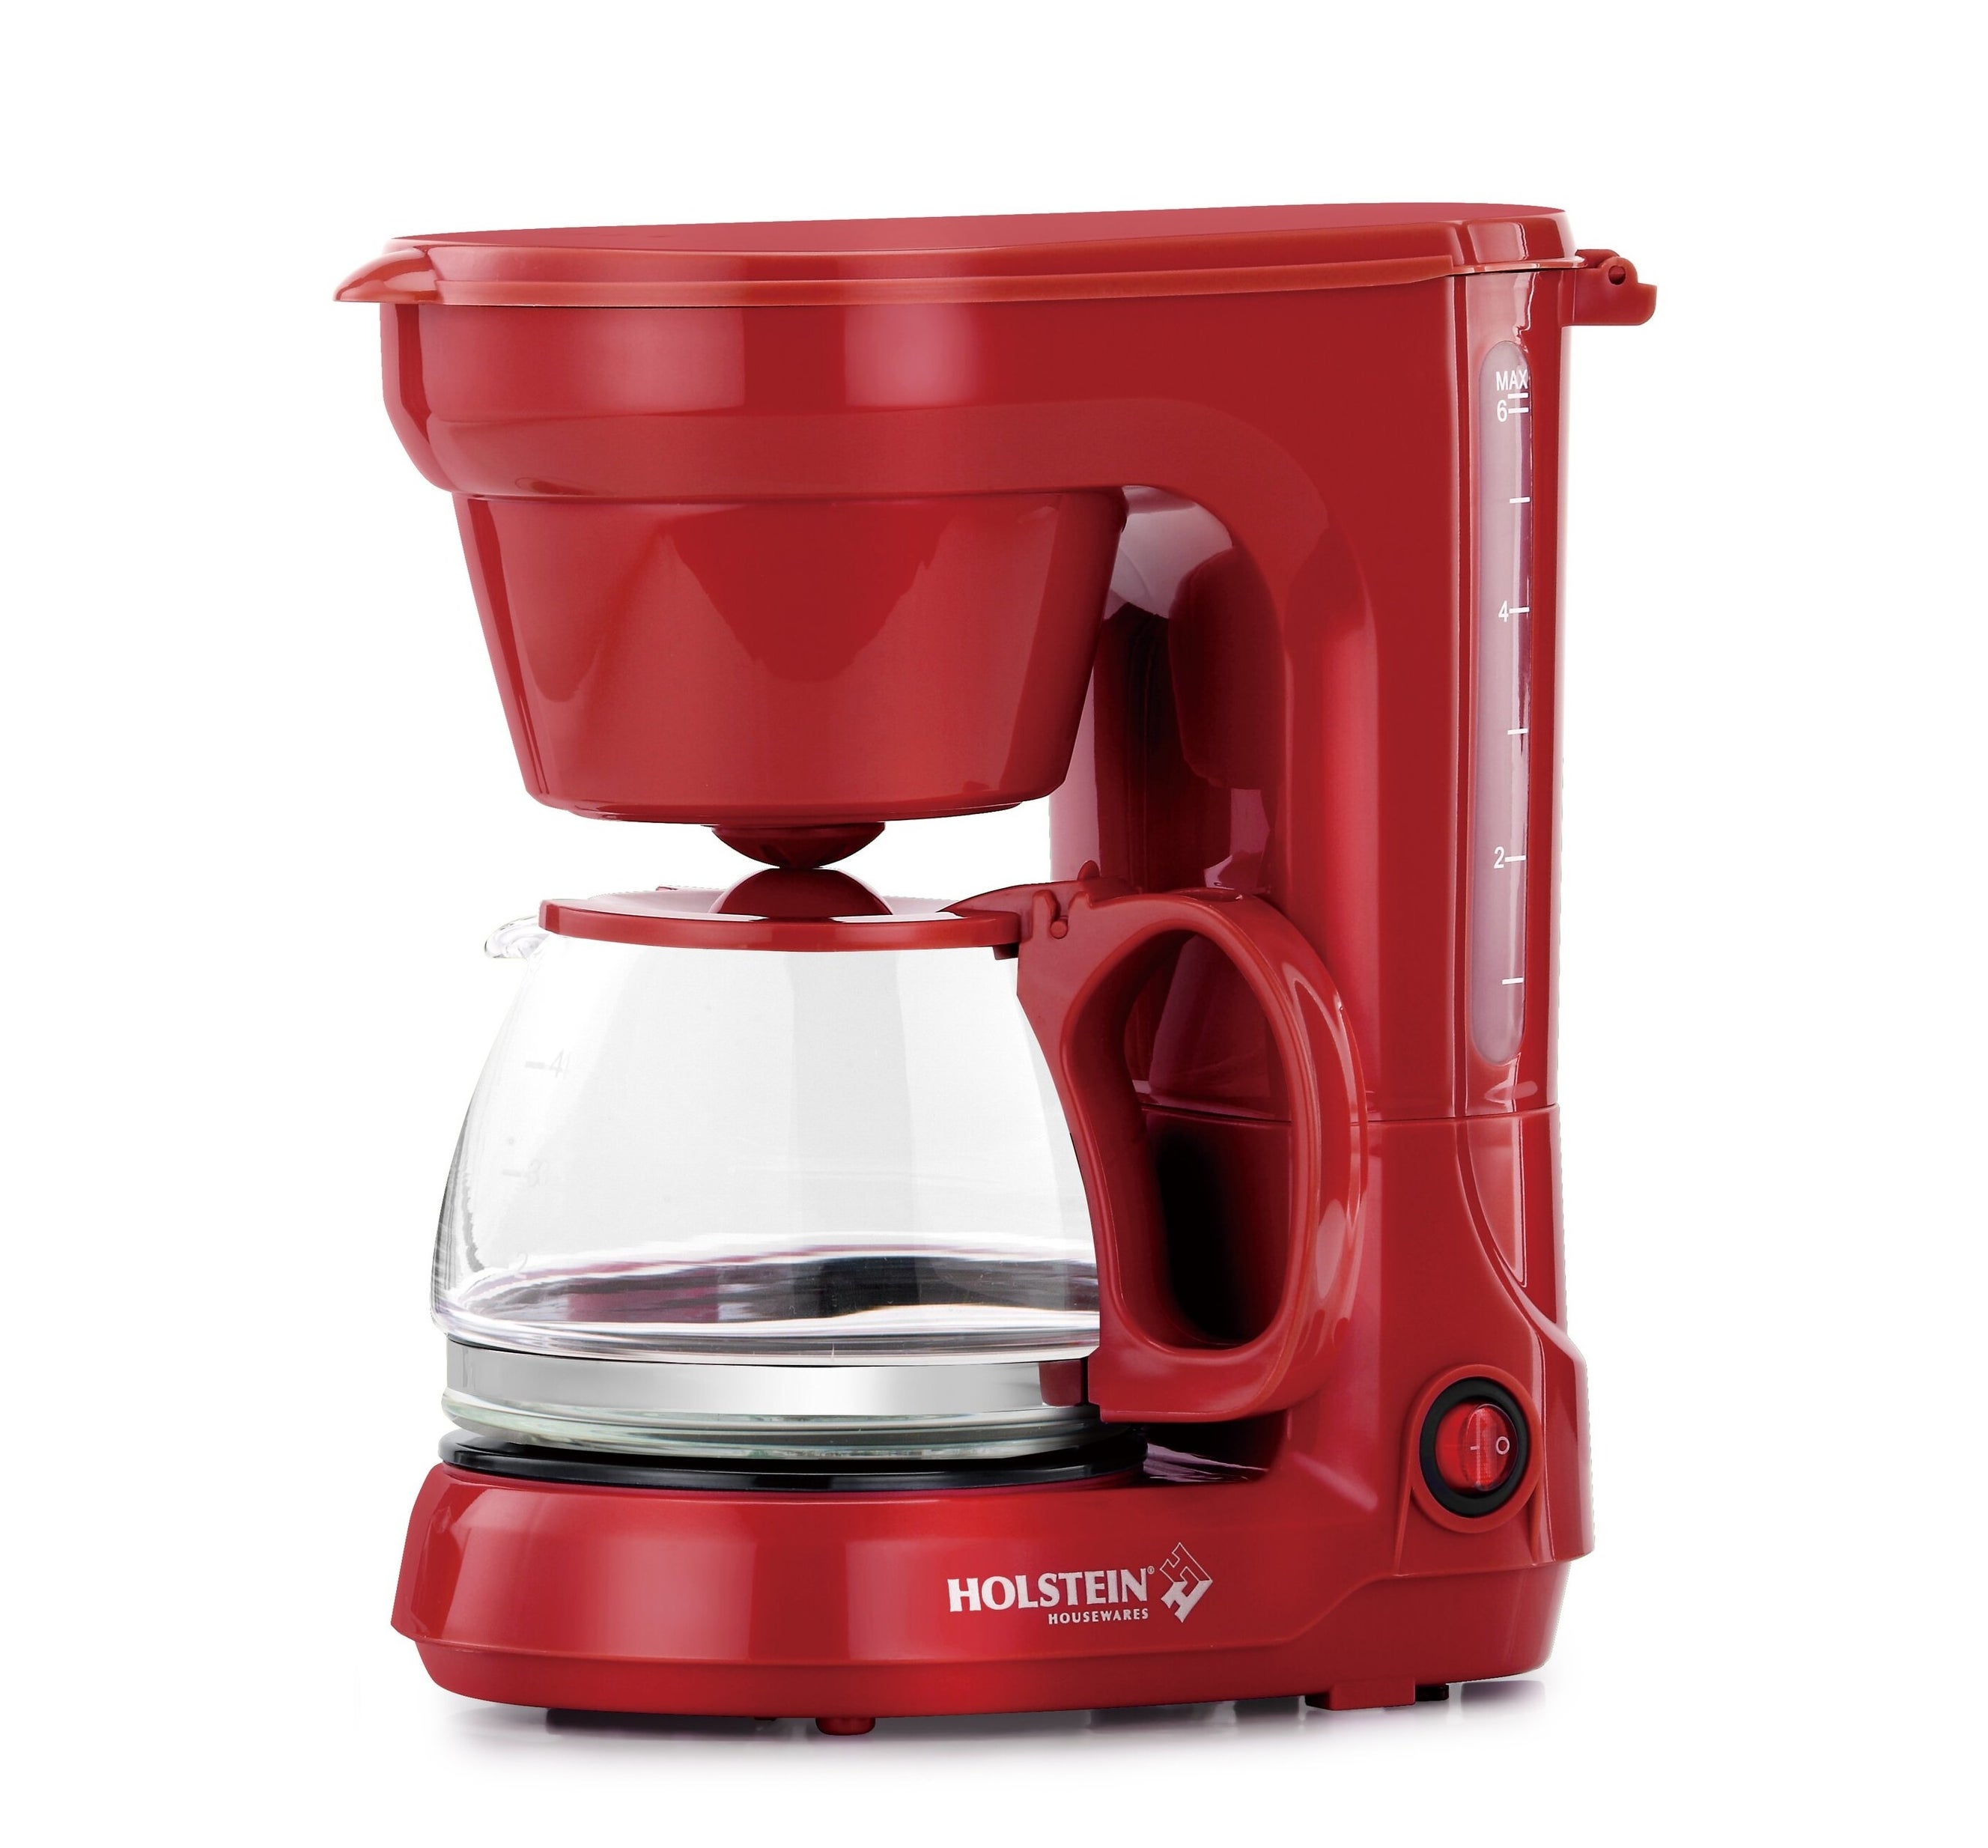 the red holstein 5 cup coffee maker